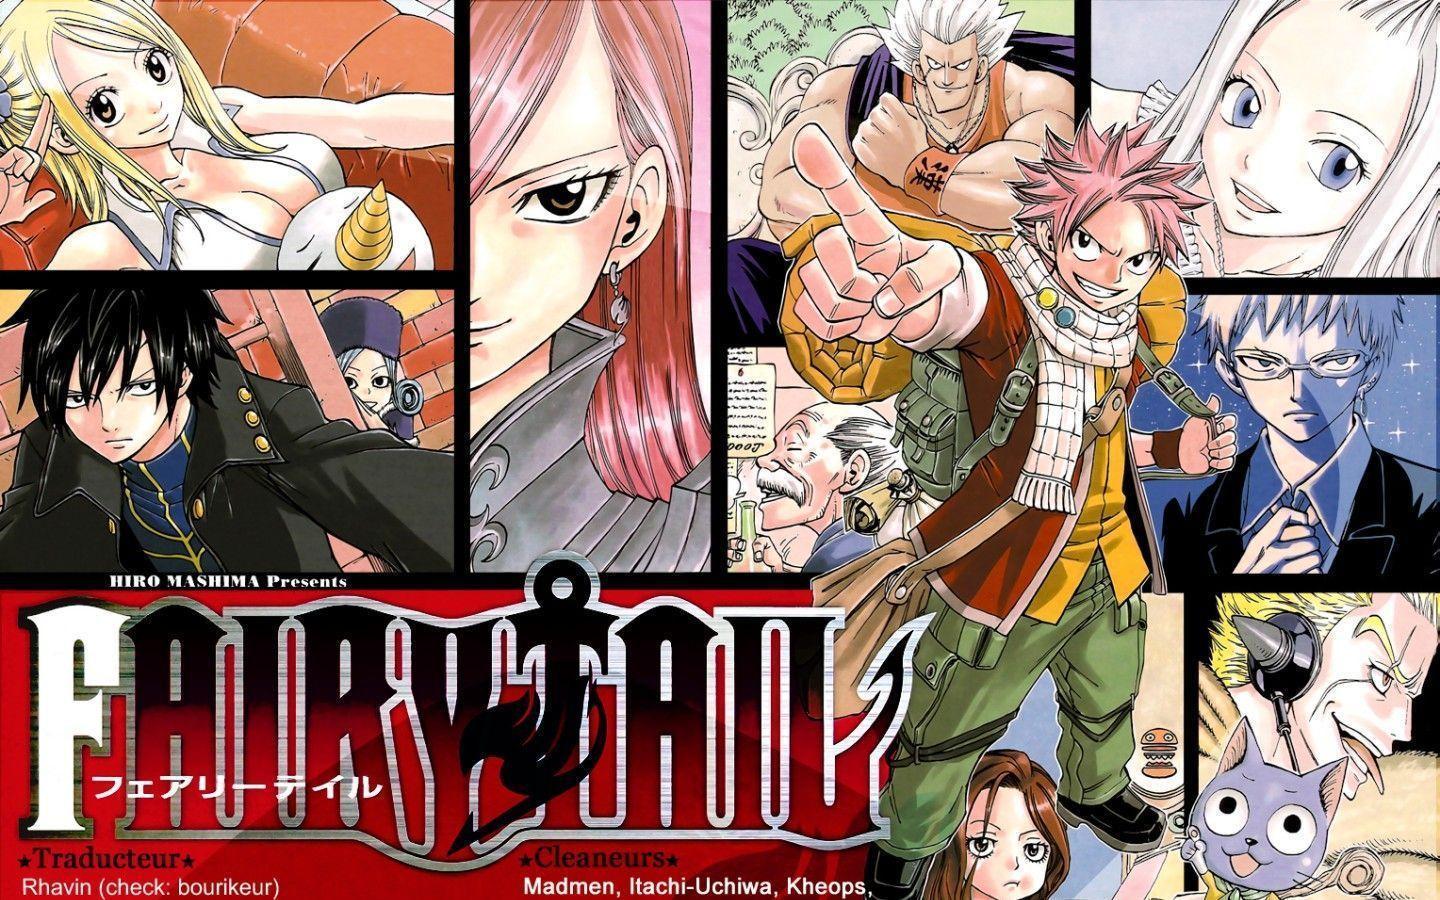 Fairy Tail HD Wallpapers and Backgrounds